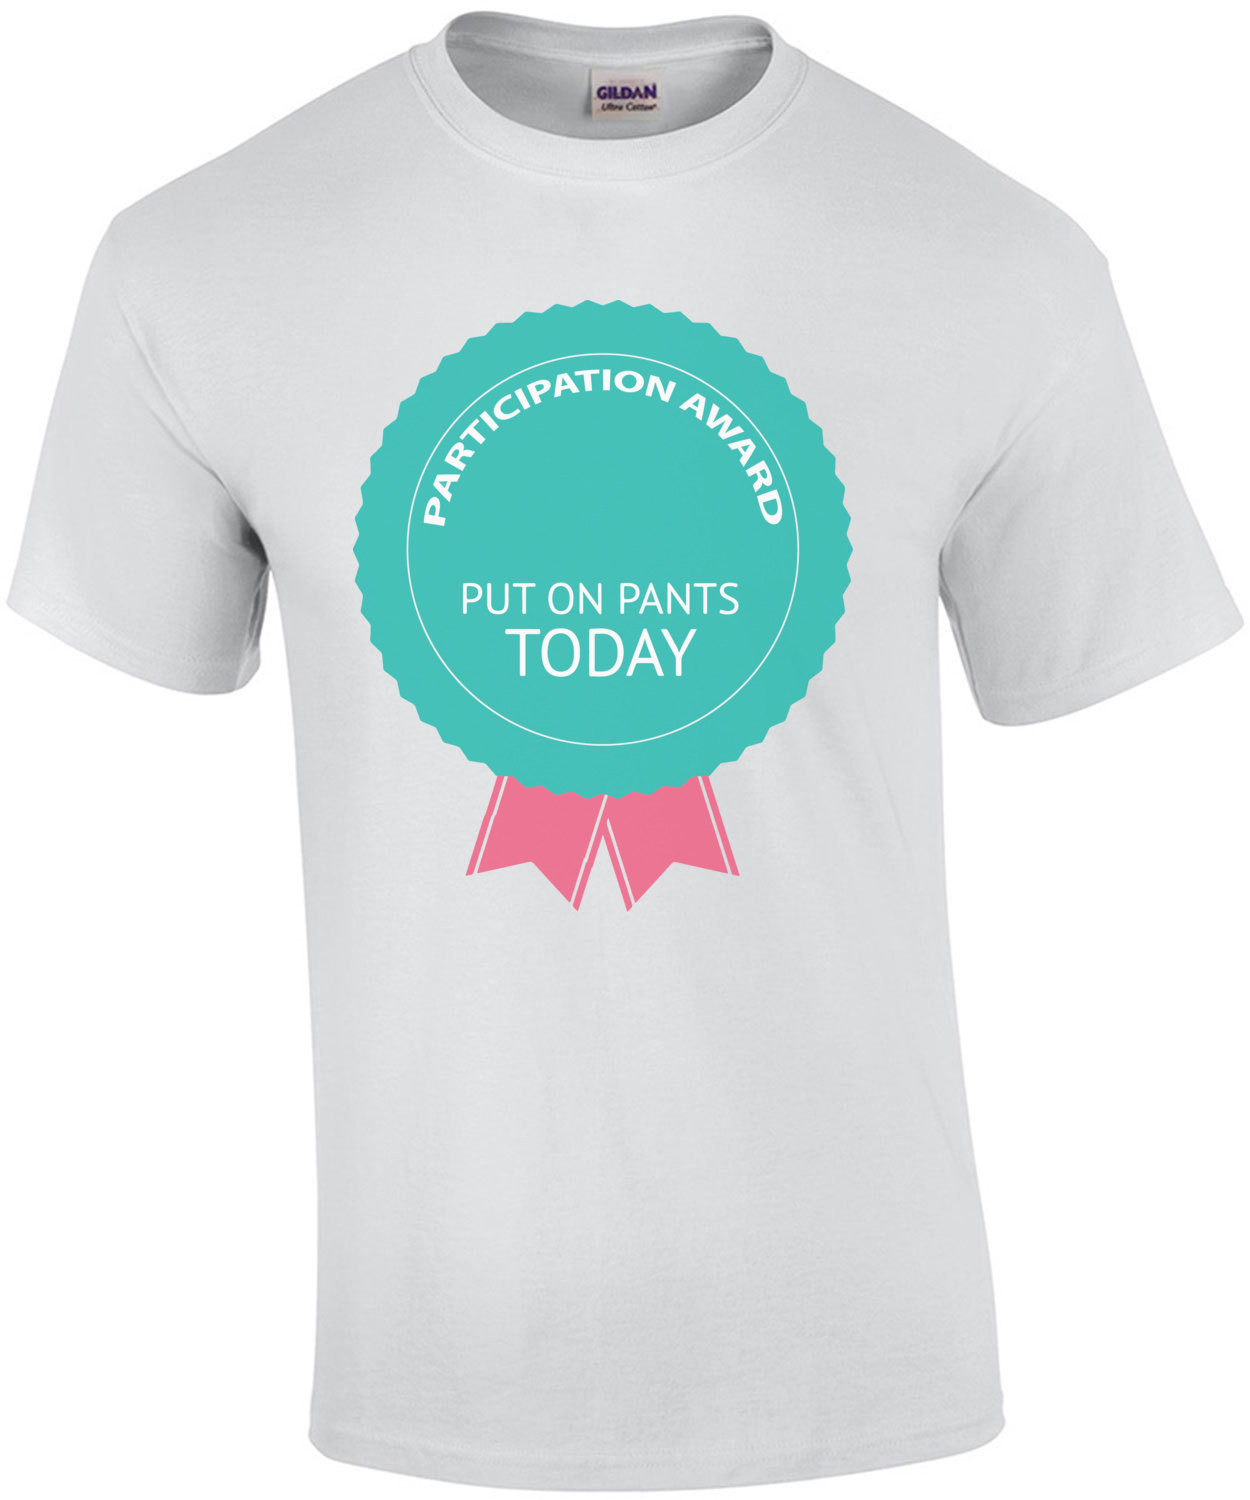 Participation Award - Put on pants today - funny